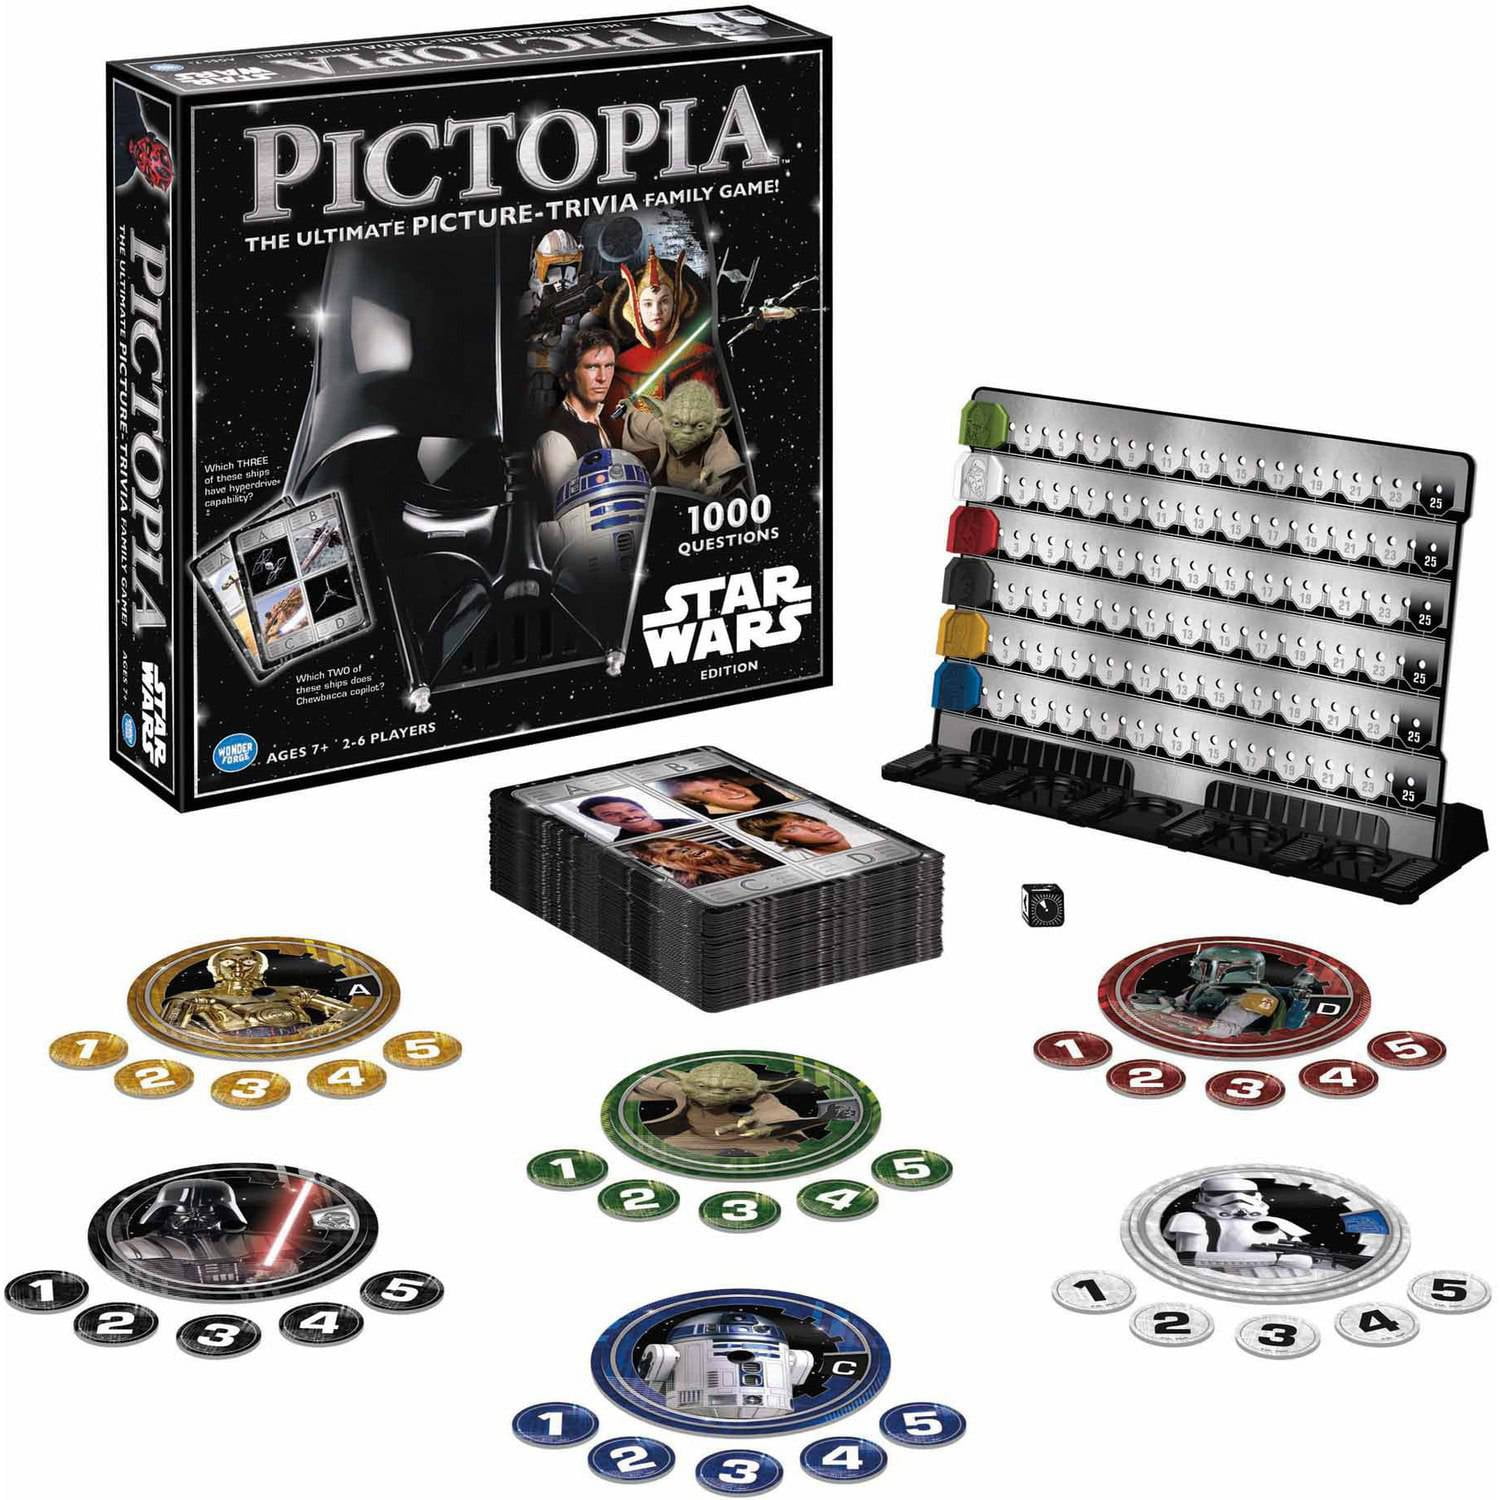 2016 Wonder Forge Star Wars Edition Pictopia Trivia Game for sale online 